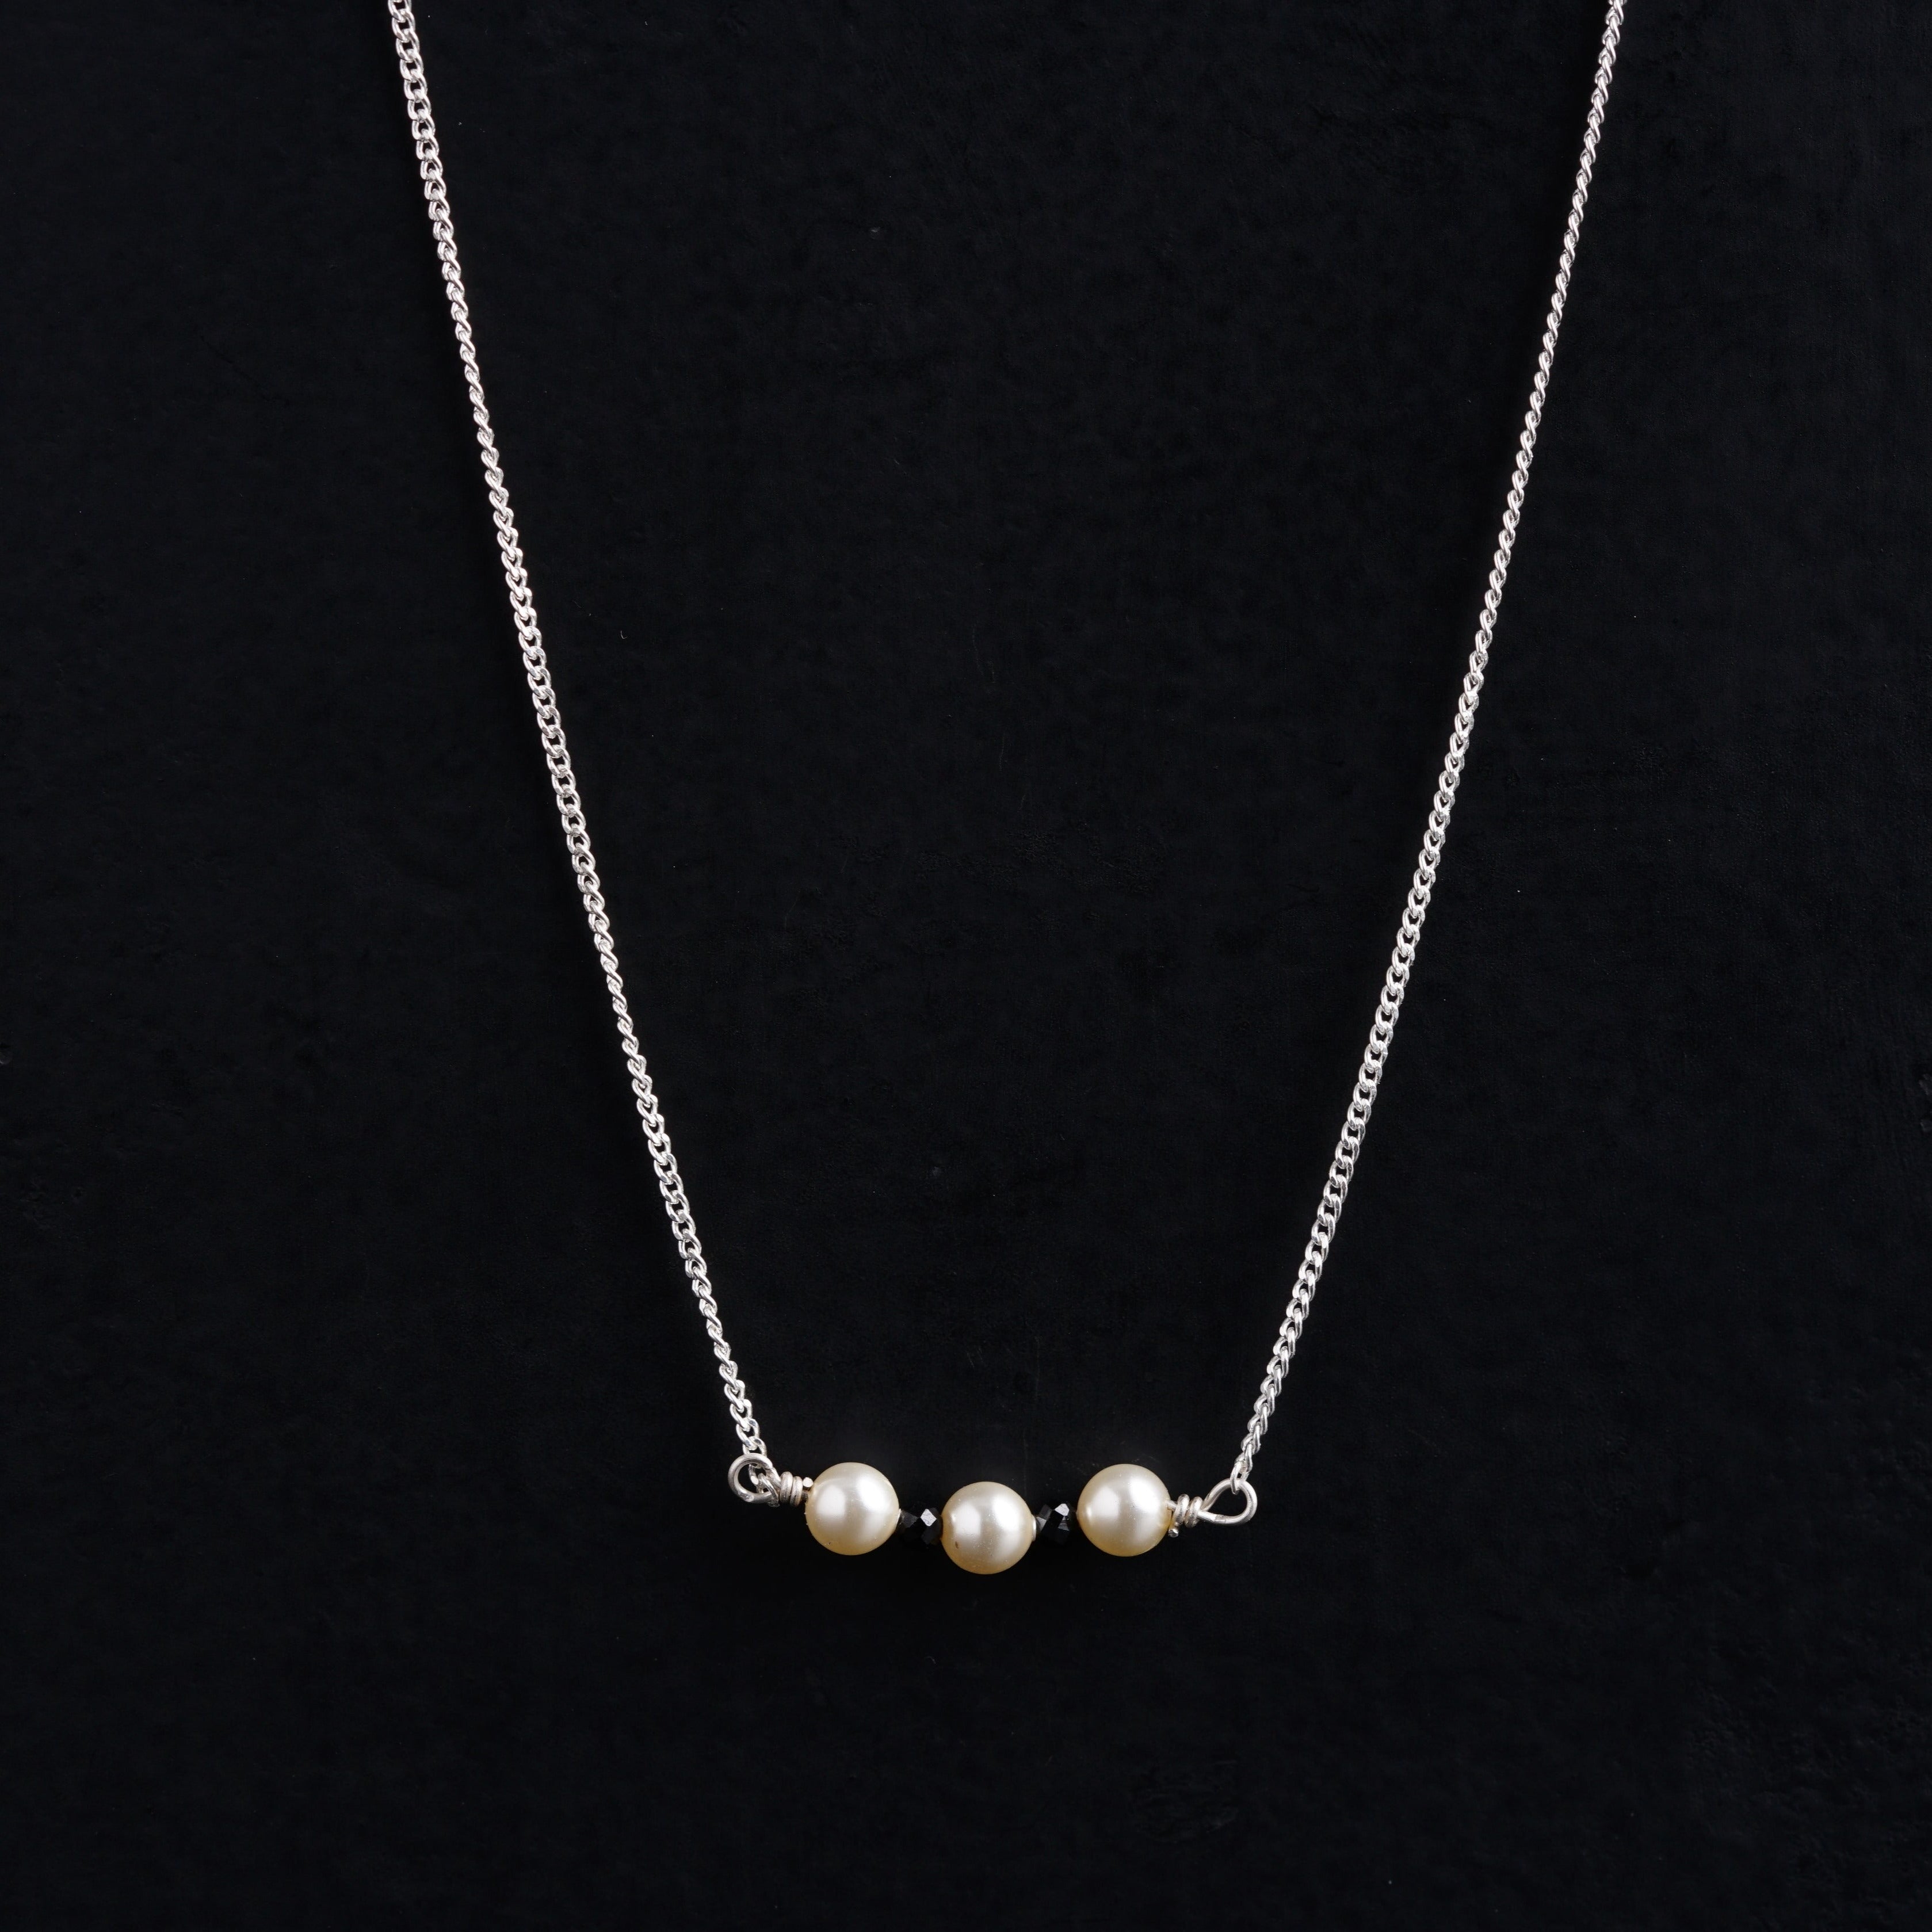 a necklace with three pearls hanging from it